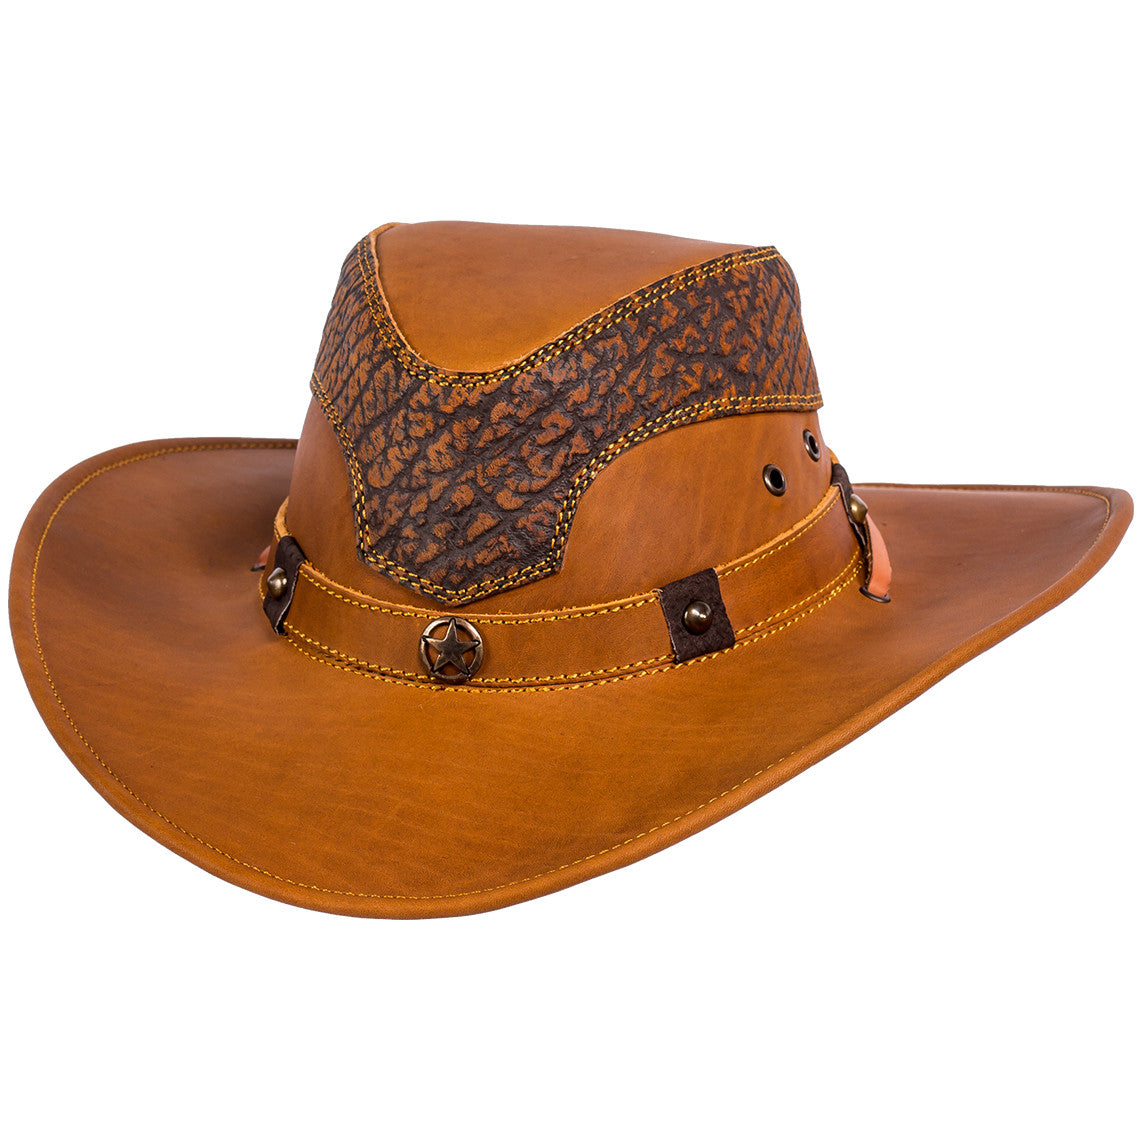 Stone Cowboy Leather Hat: Experience The Outback